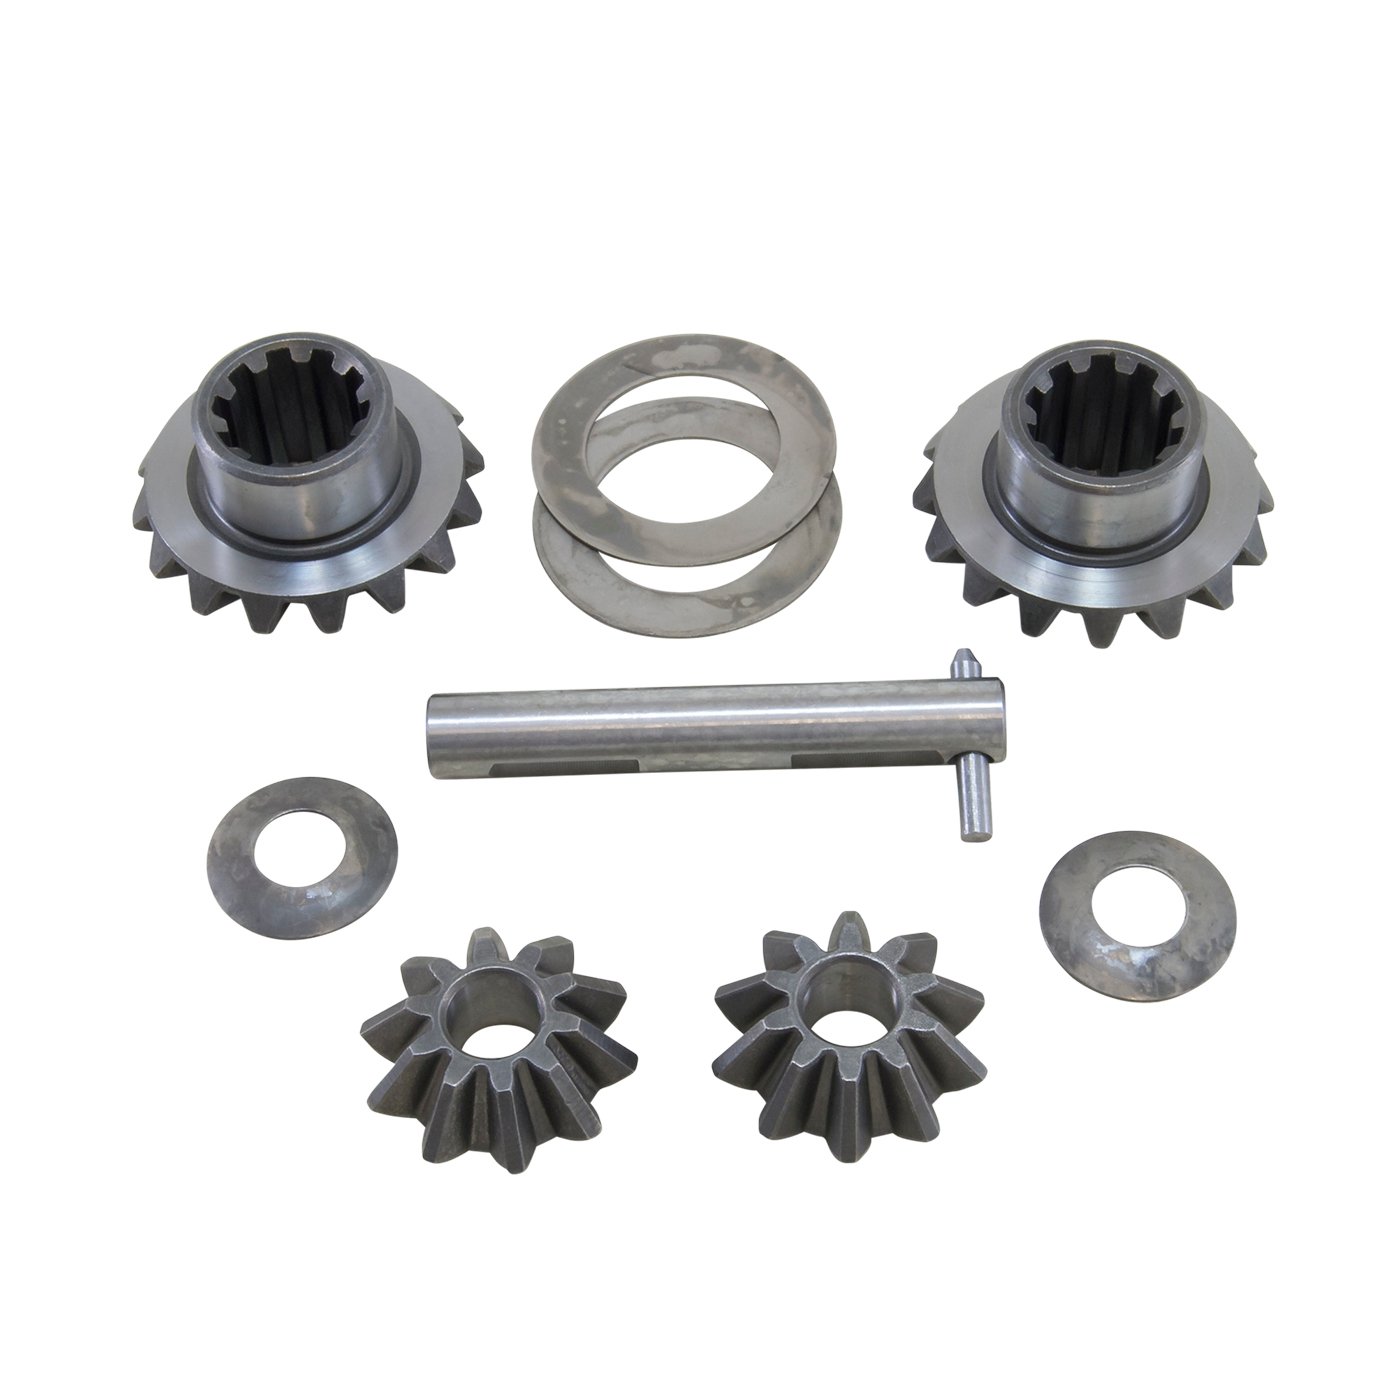 Standard Open Spider Gear Replacement Kit For Dana